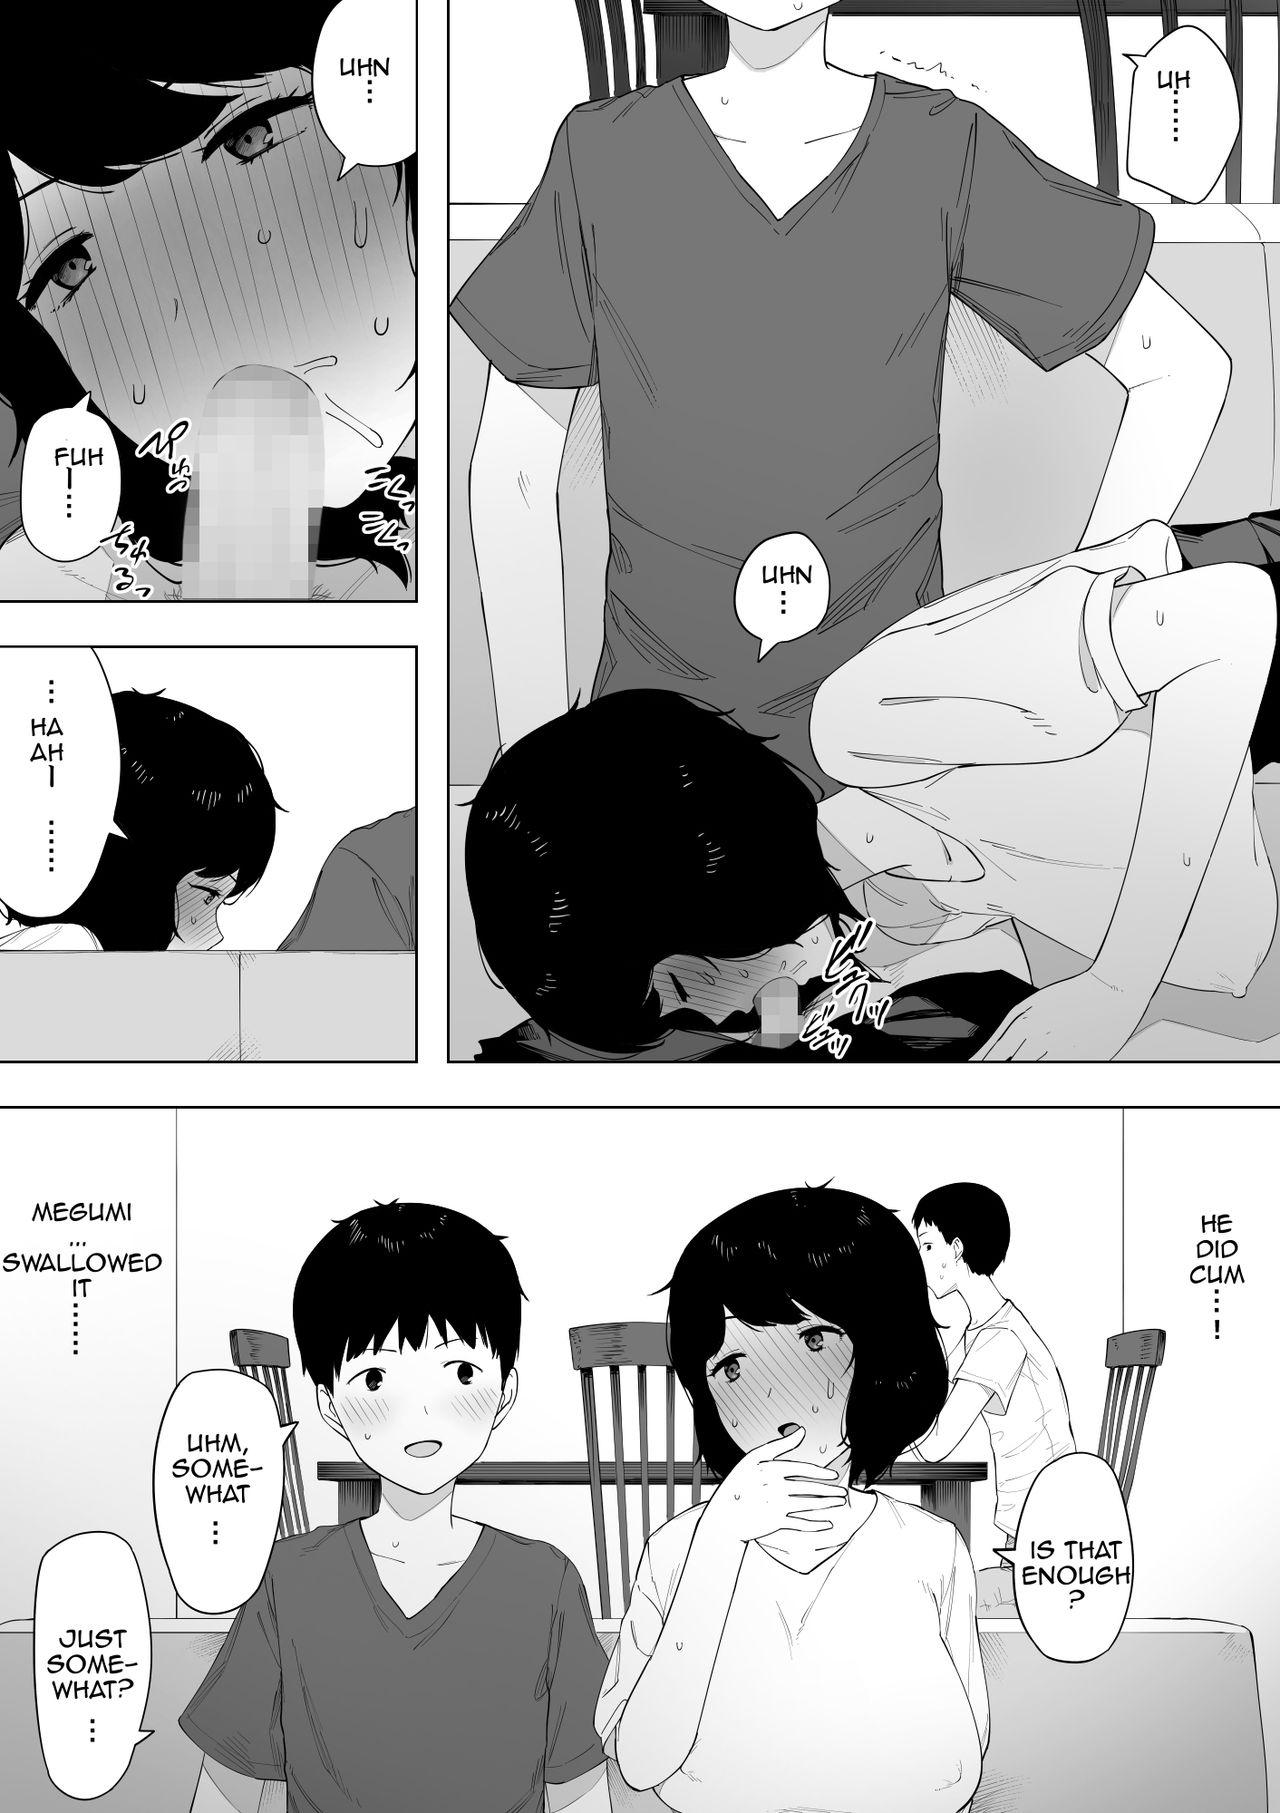 Sloppy Blow Job Haha to Shite? Tsuma to Shite? | As a Mother? As a Wife? - Original Hot Brunette - Page 11